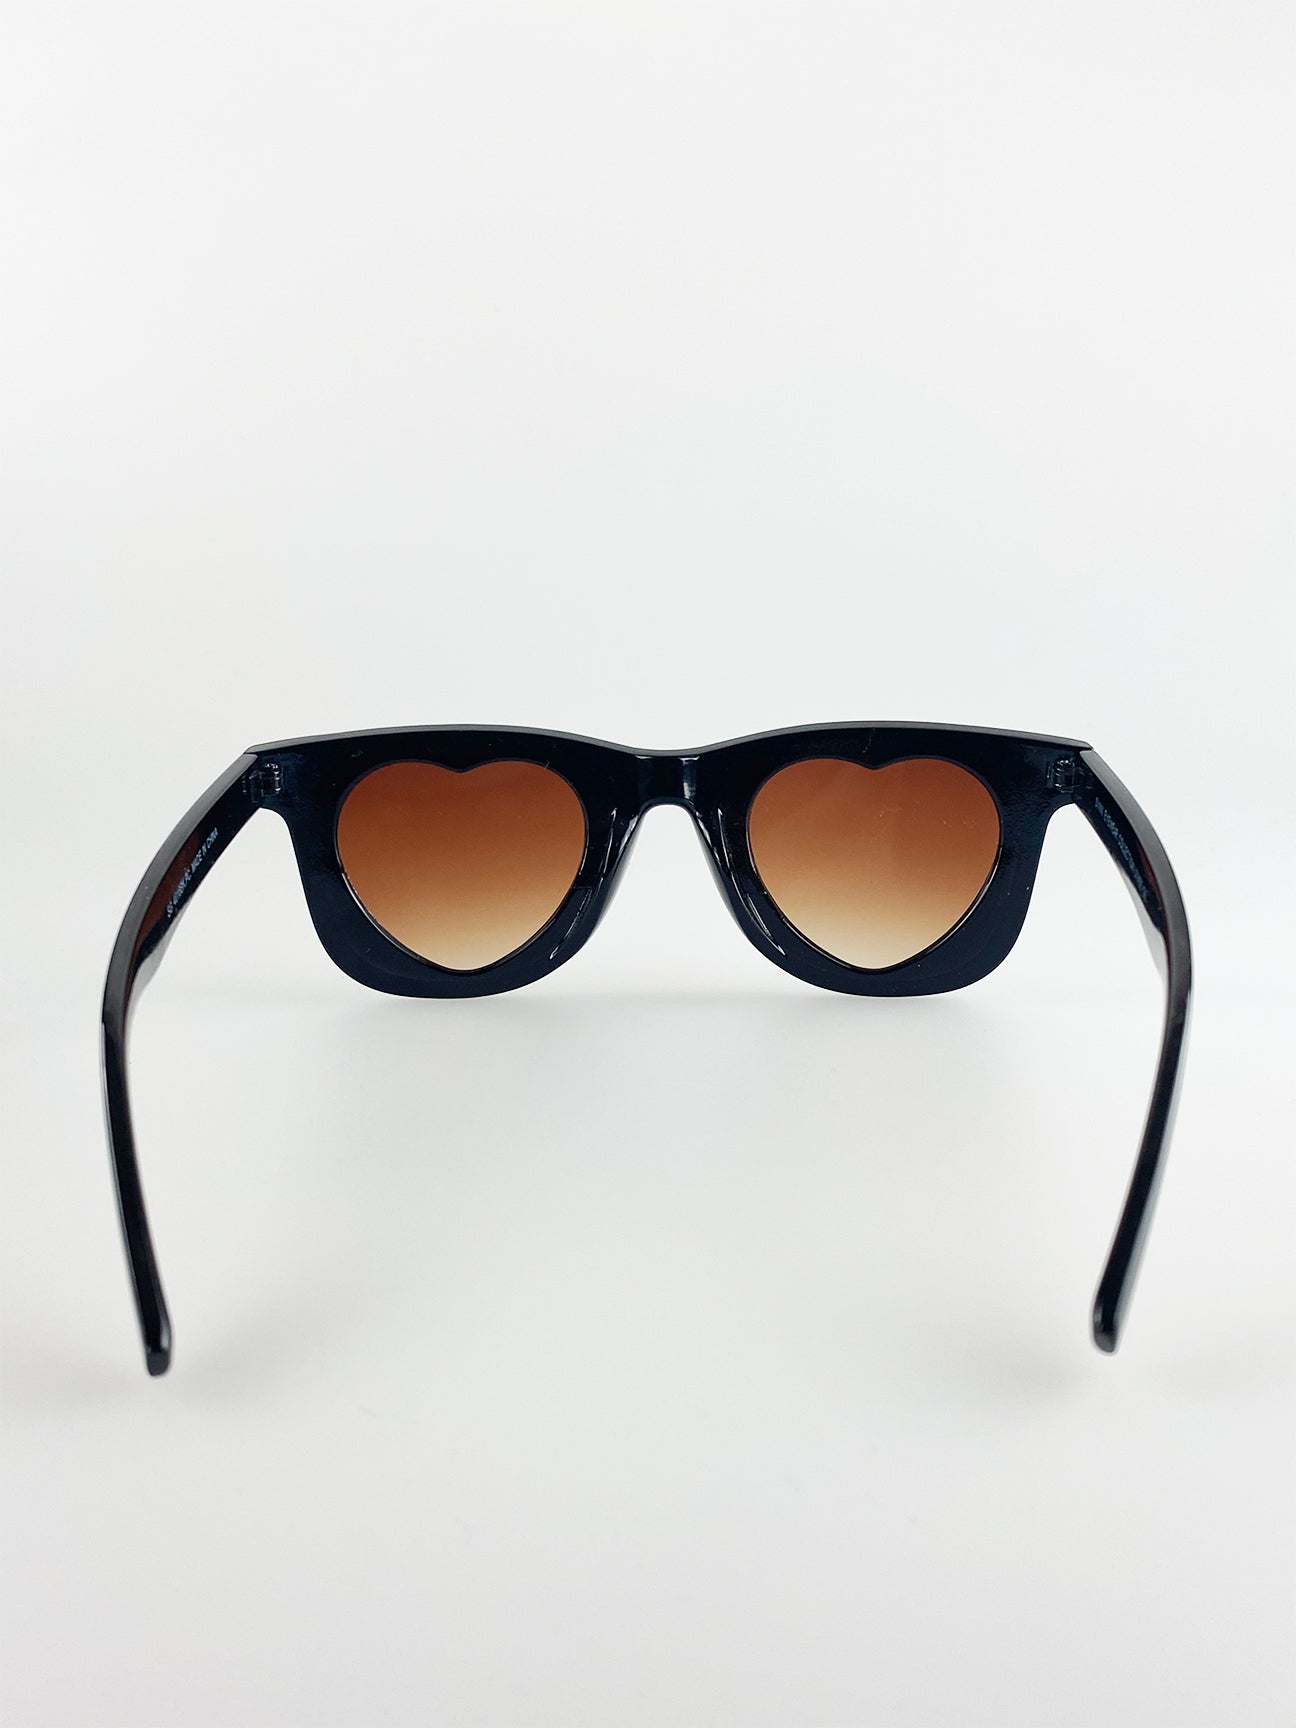 Black Rectangle Sunglasses with Brown Heart Lenses